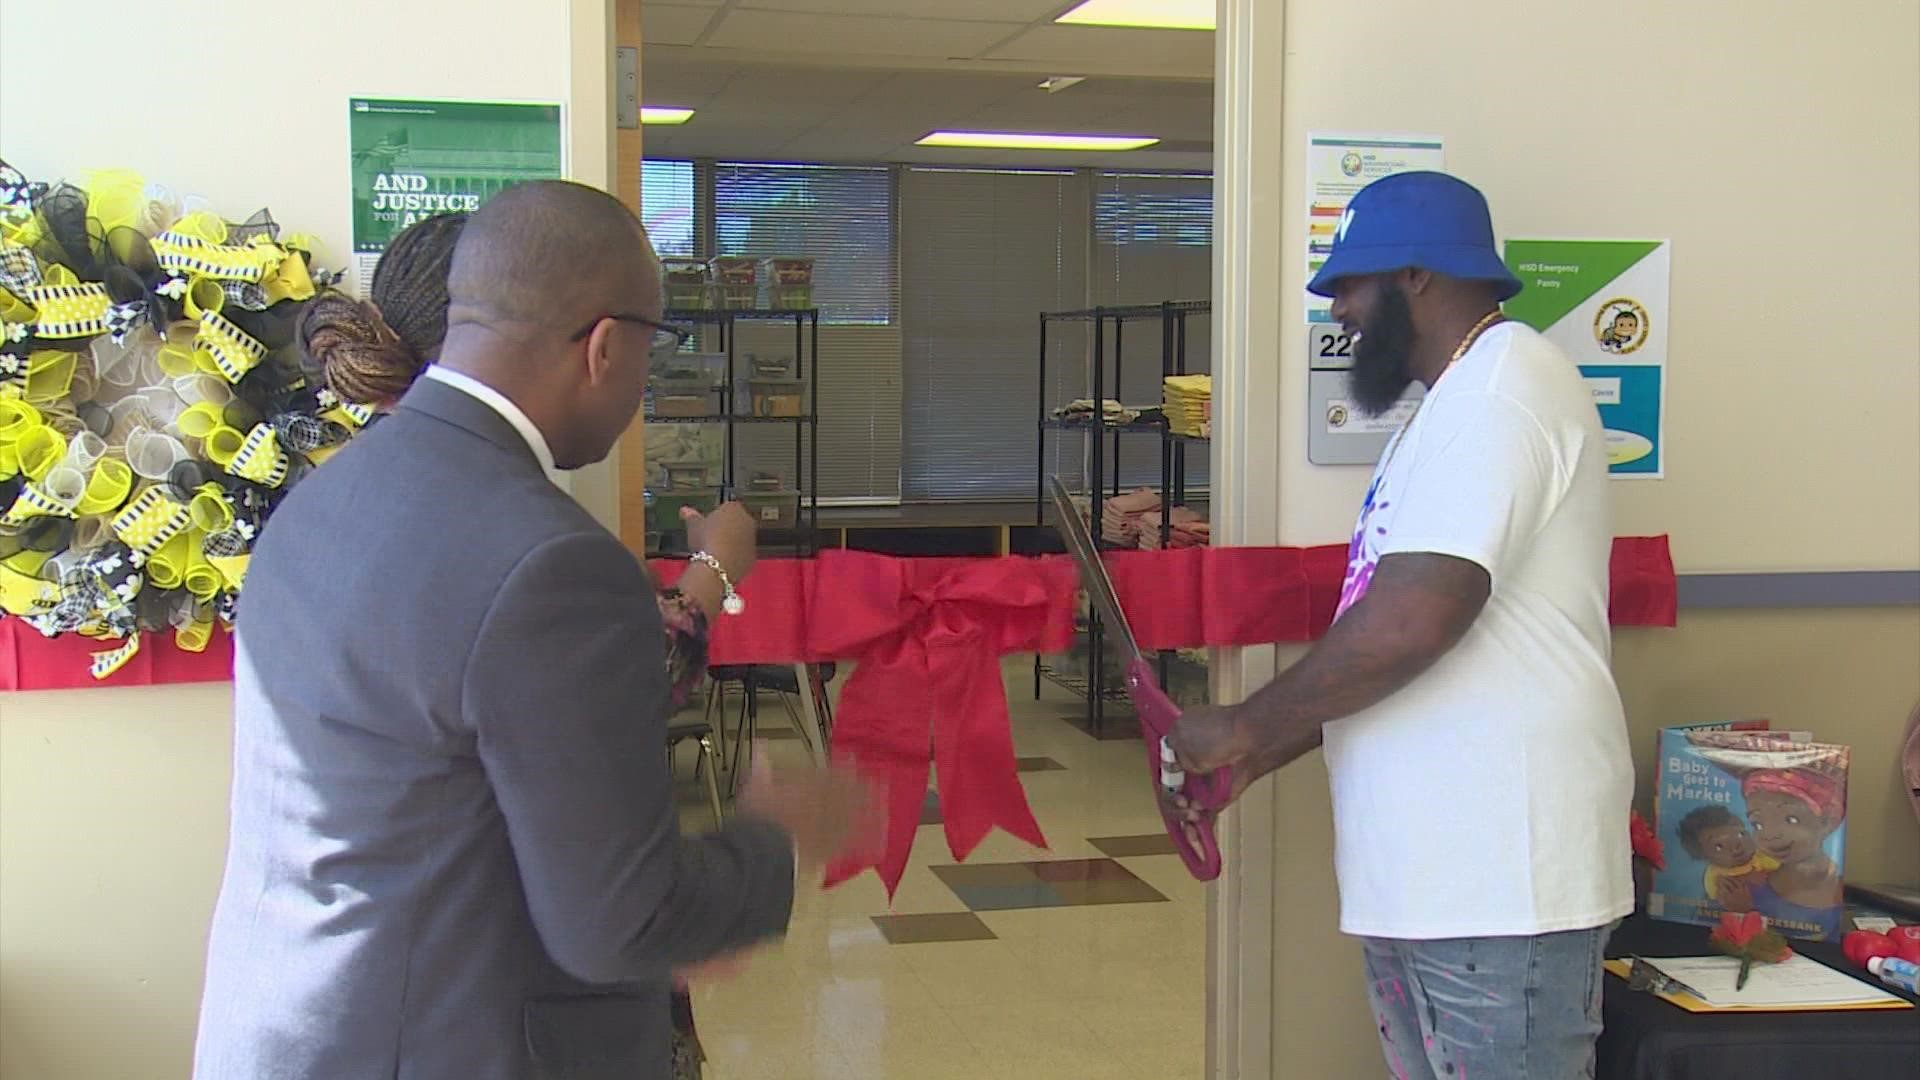 Trae Tha Truth helped convert an HISD classroom into a store-like experience for students experiencing homelessness.